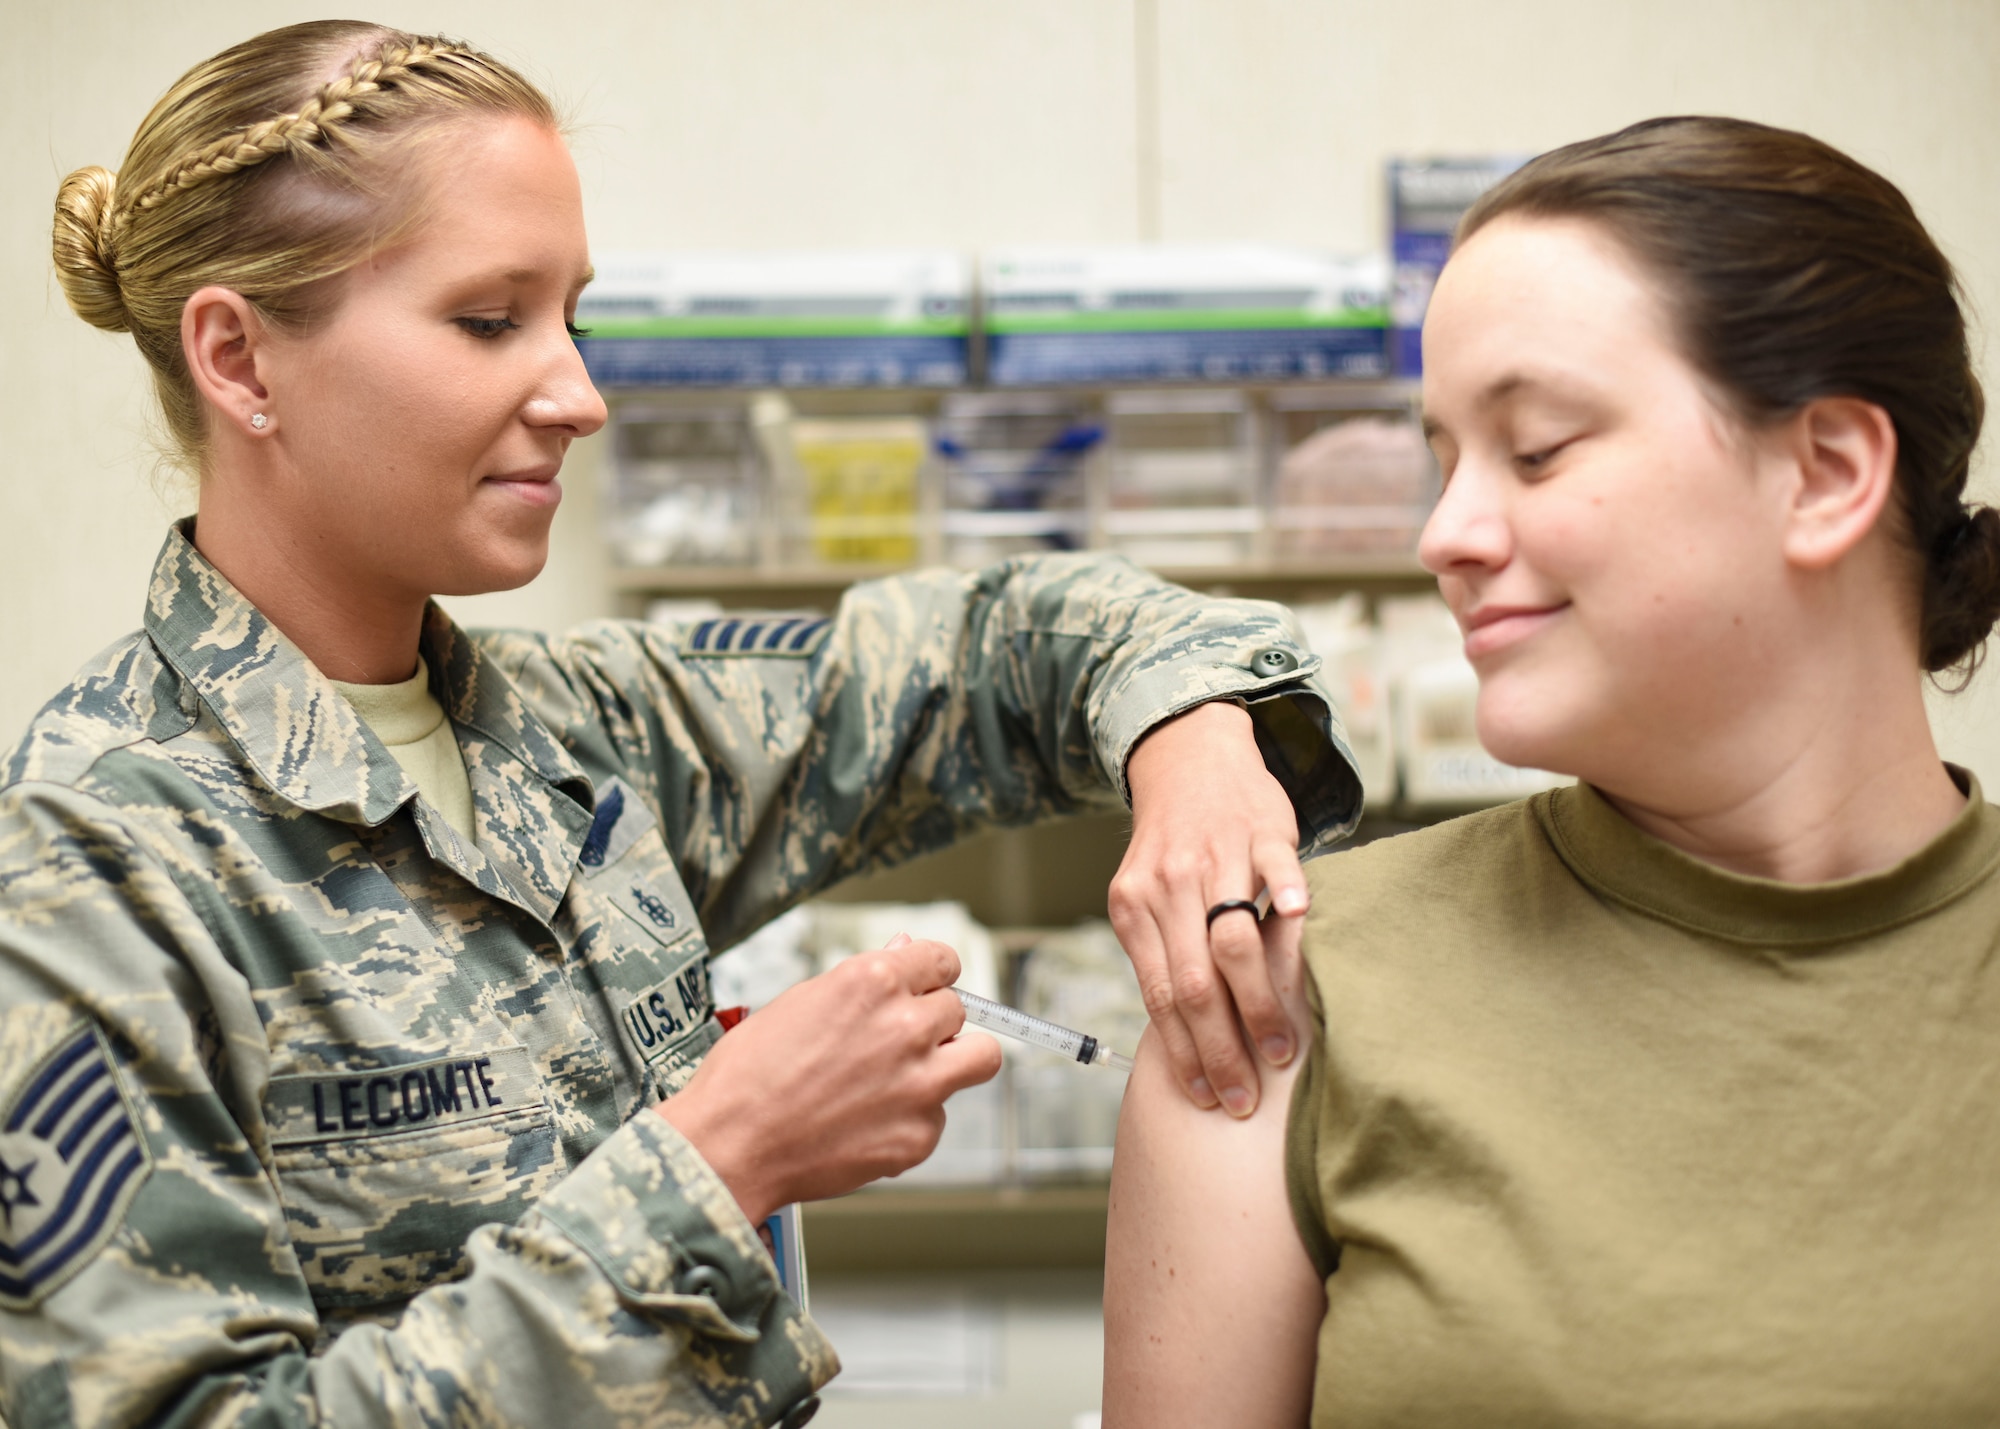 U.S. Air Force Tech. Sgt. Haley Lecomte, 325th Medical Group immunizations noncommissioned officer in charge, administers a vaccine to Staff Sgt. Alyssa Korb, 325th MDG aerospace medical technician, June 6, 2019, at Tyndall Air Force Base, Florida.